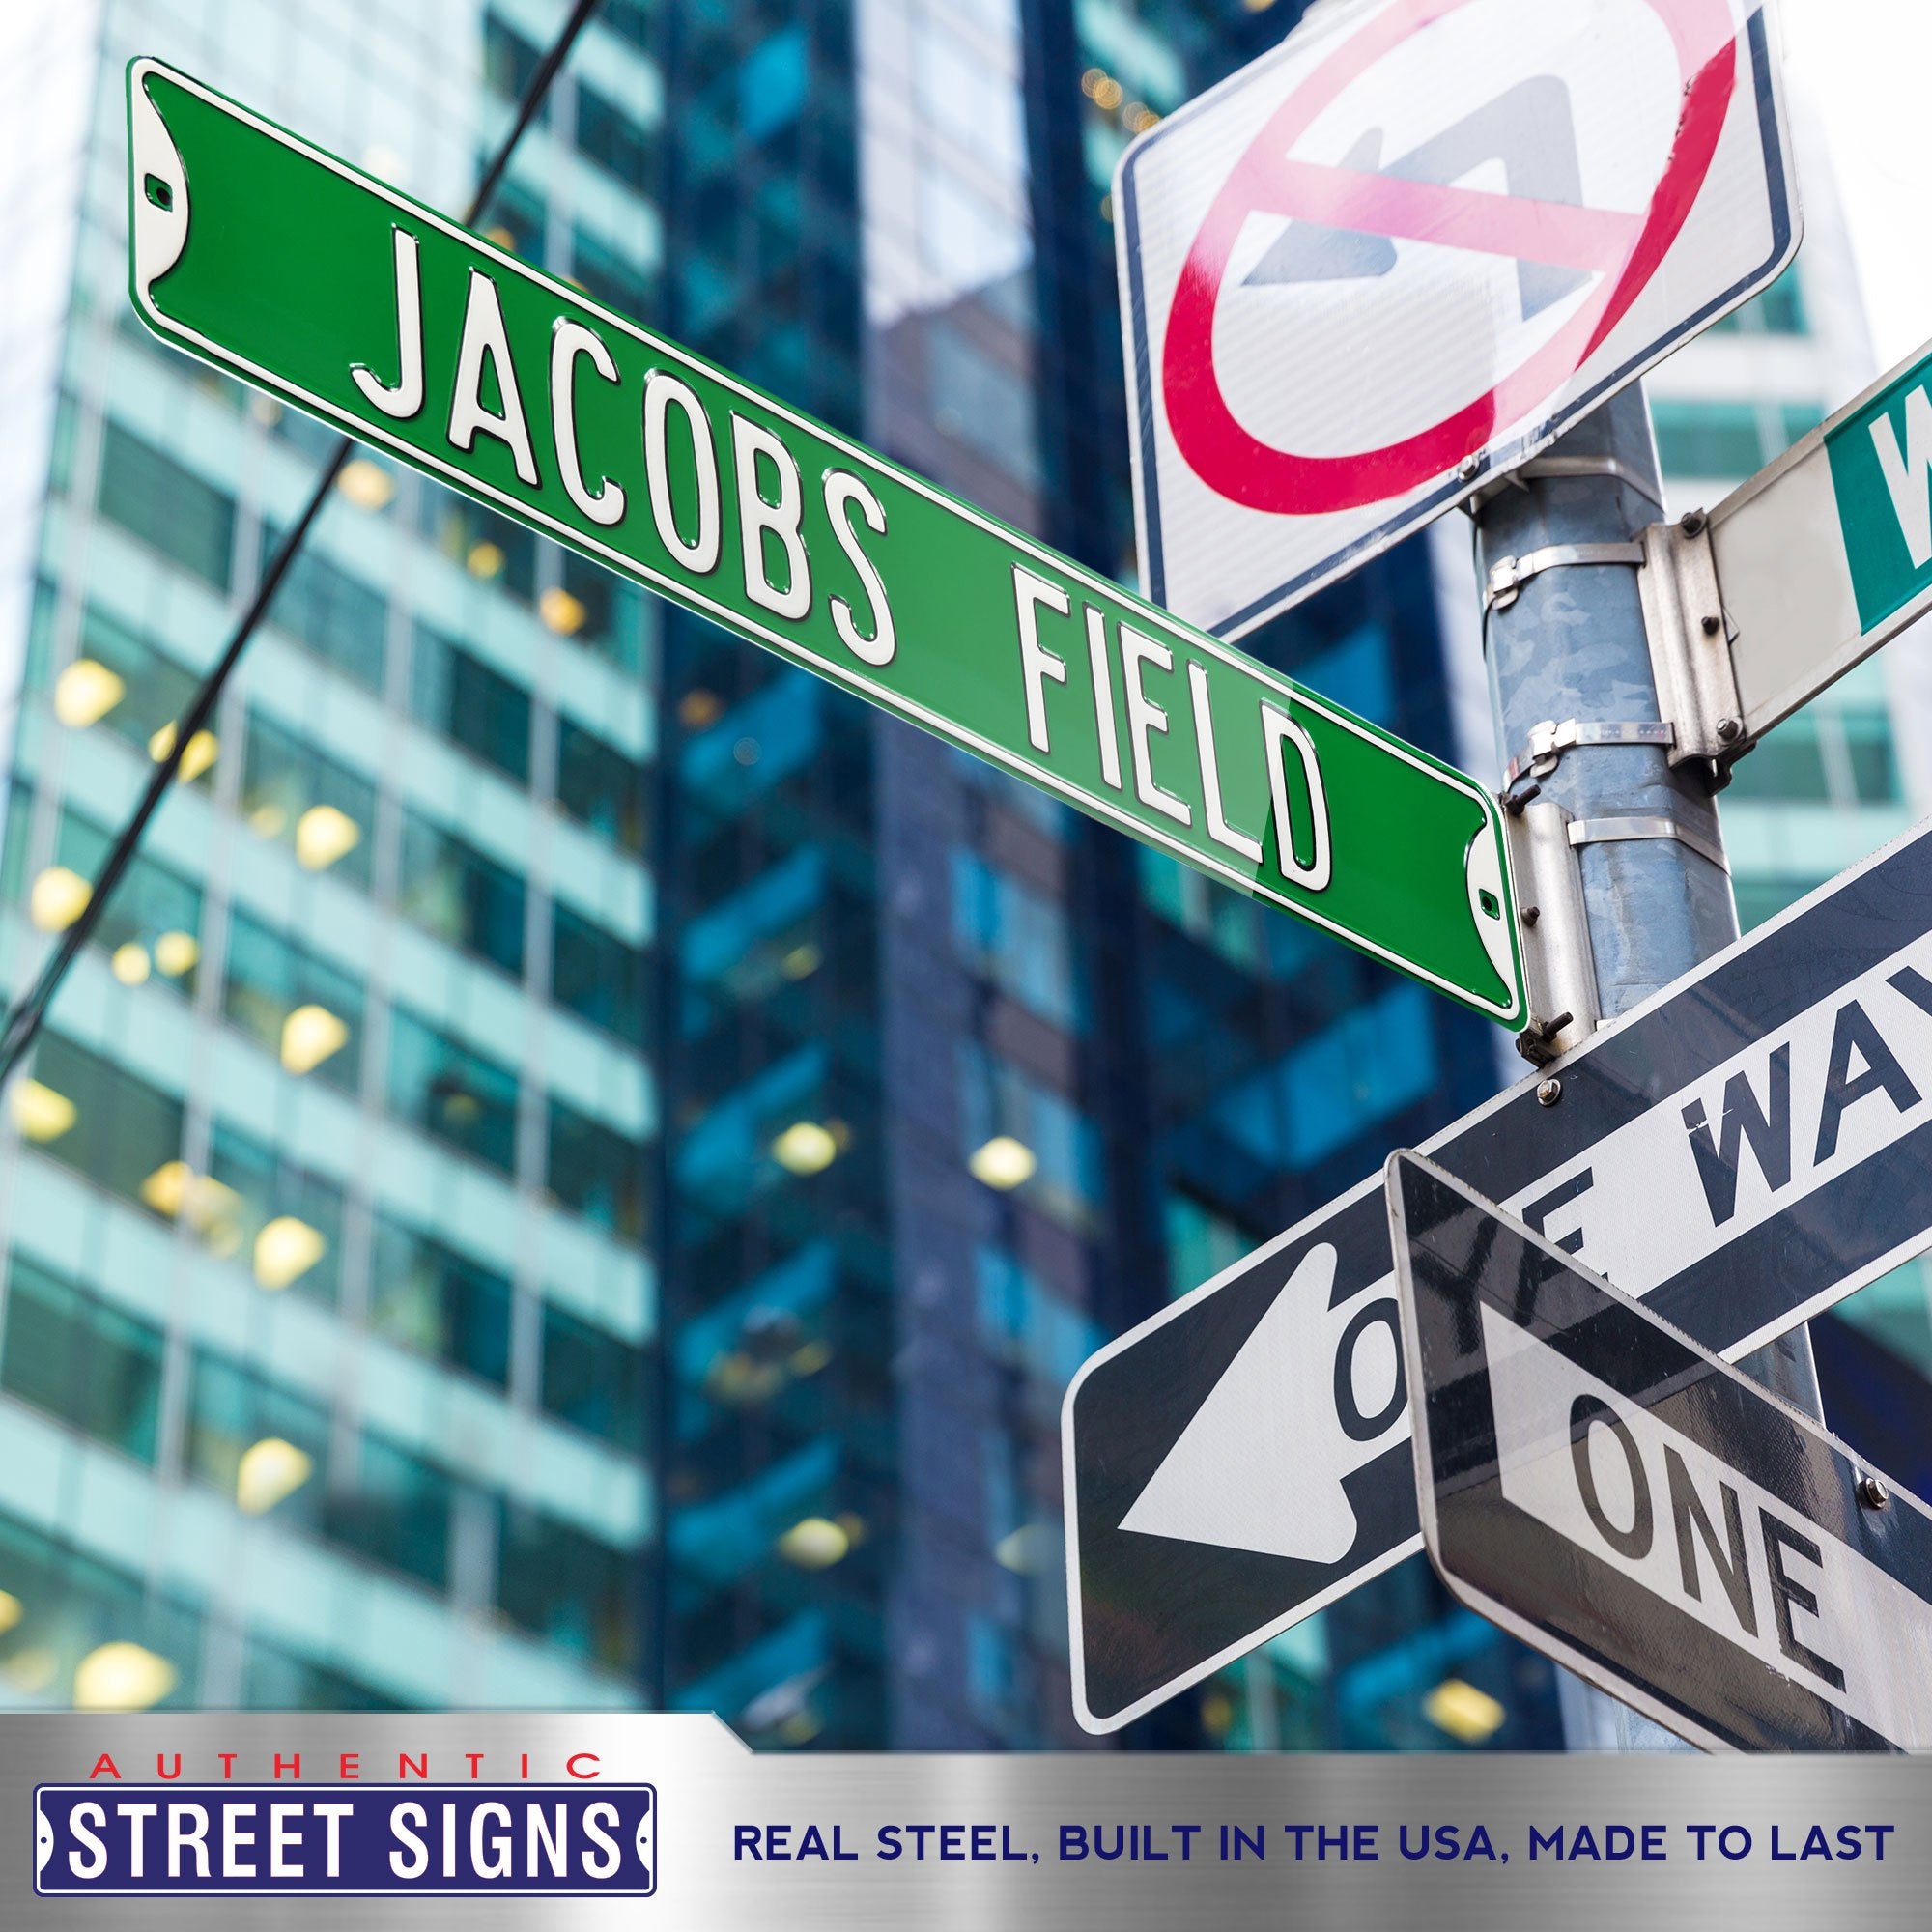 Cleveland Indians Steel Street Sign-JACOBS FIELD on Green 36" W x 6" H by Fathead